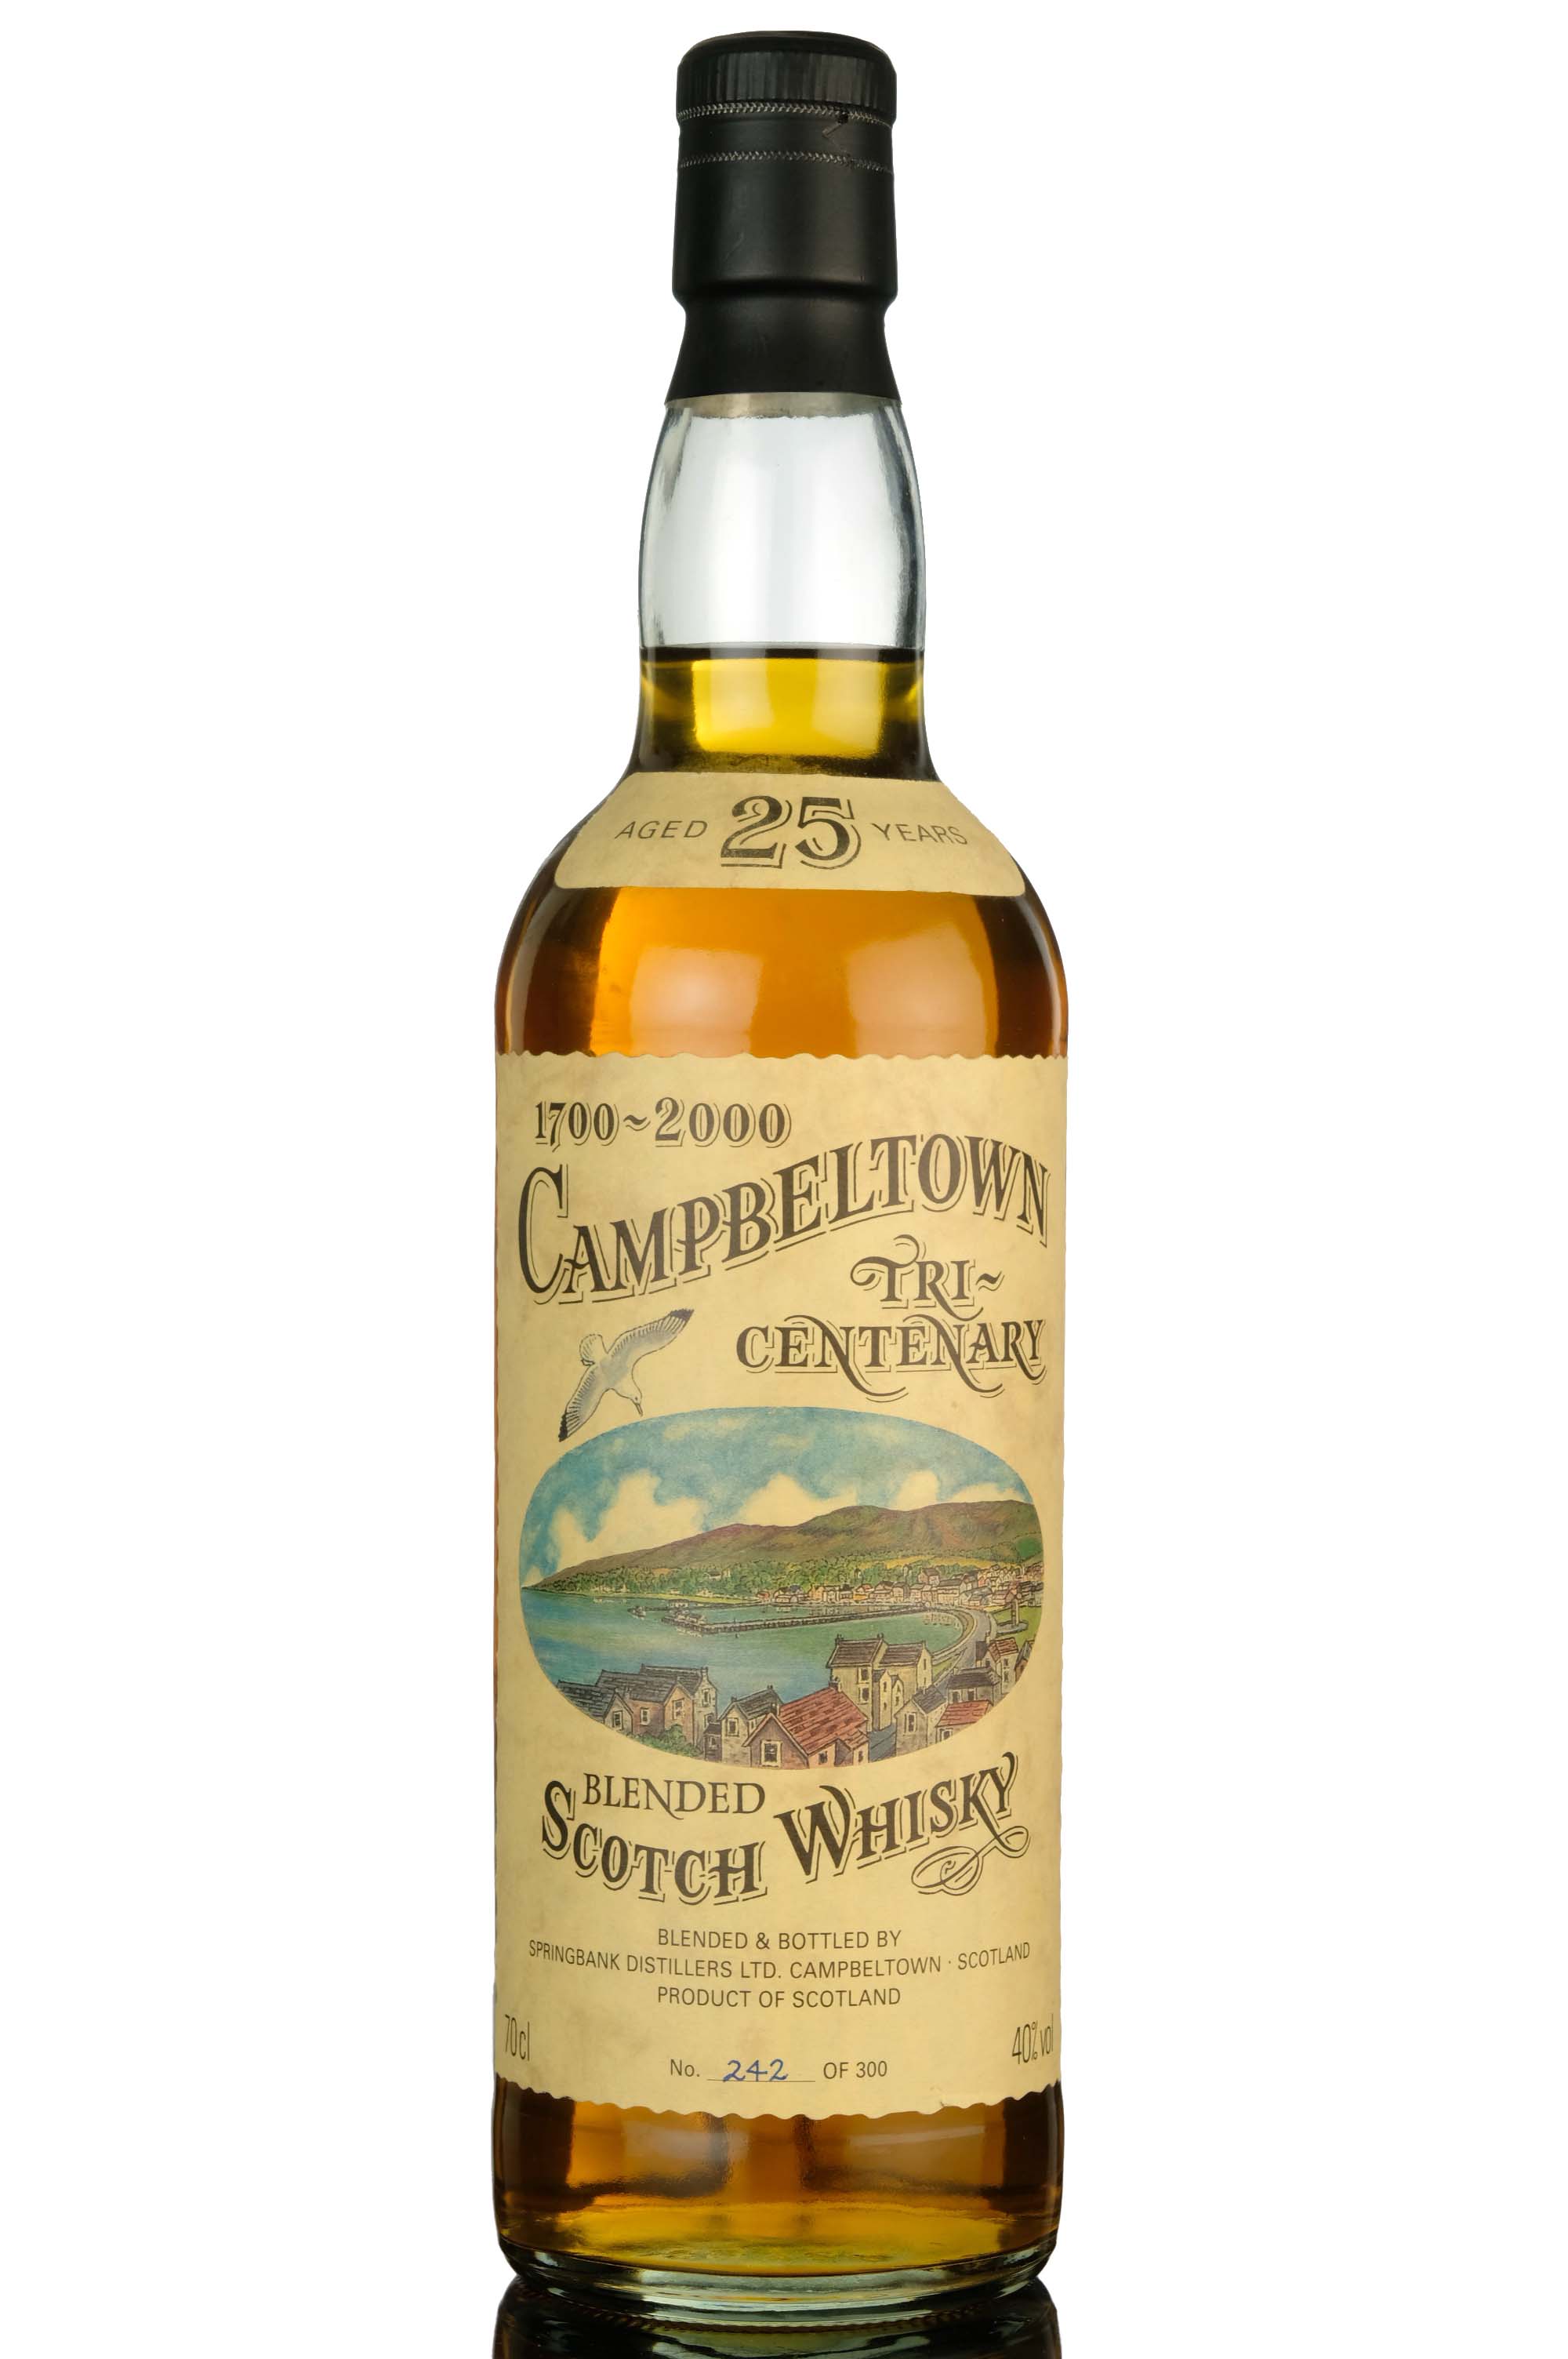 Campbeltown 25 Year Old - Tri-Centenary 1700-2000